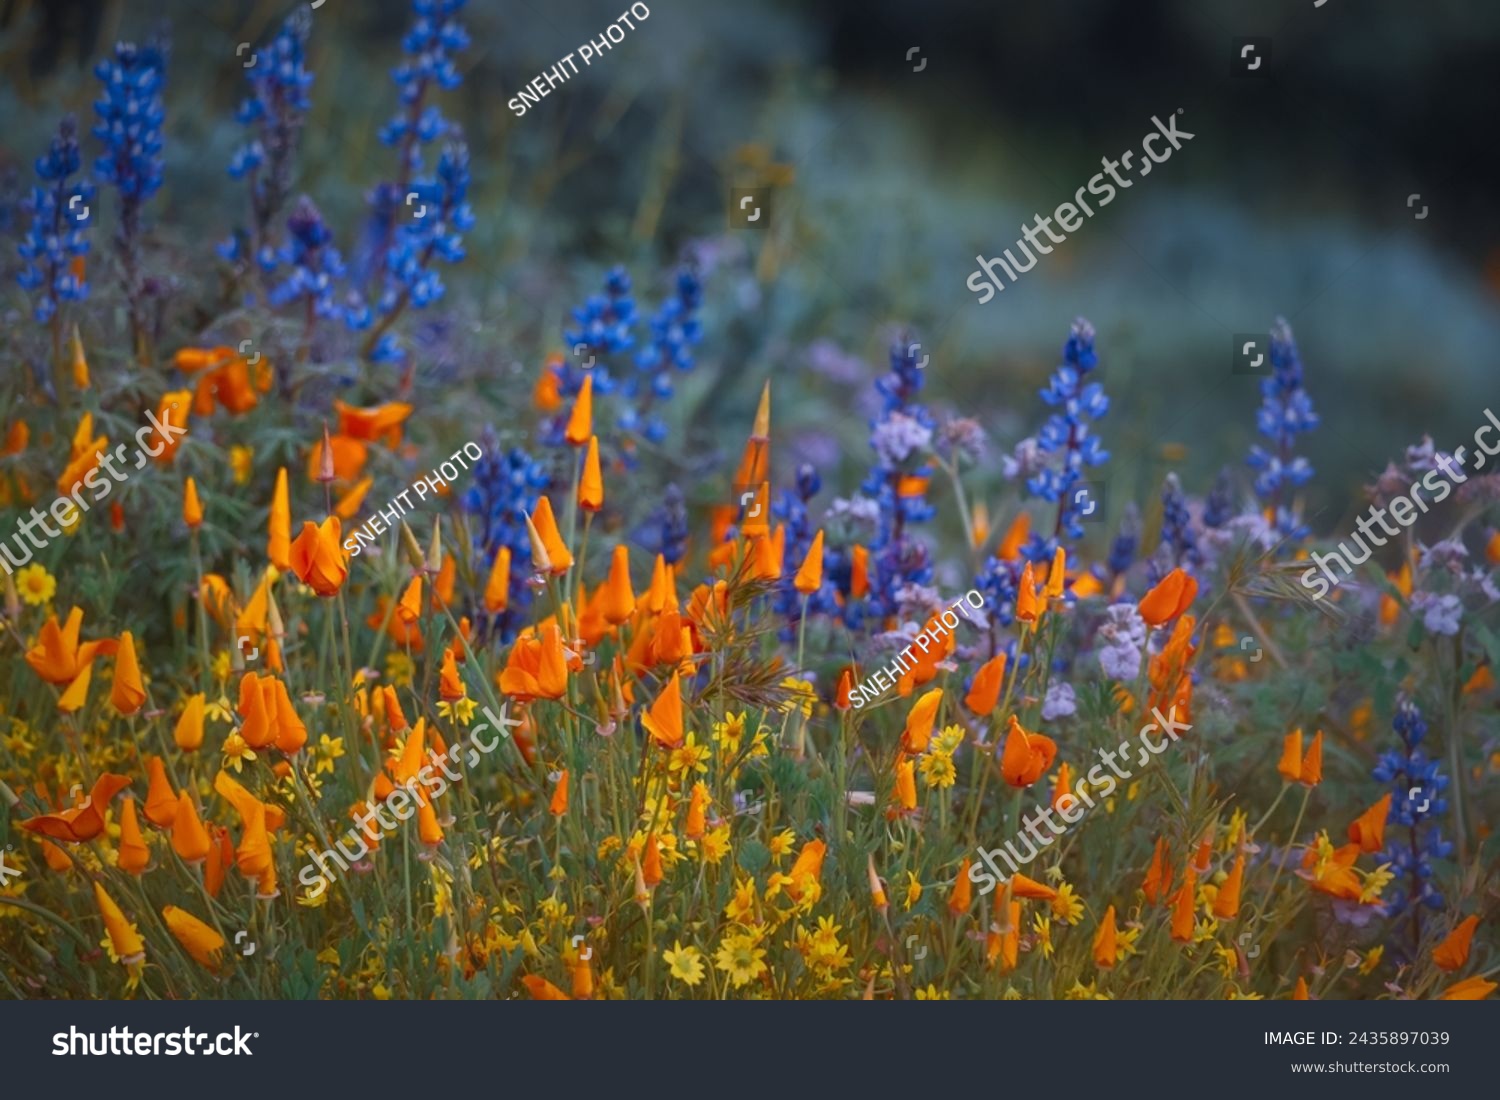 Close up view of California poppy wildflowers at Diamond valley lake under rain, selective focus. #2435897039